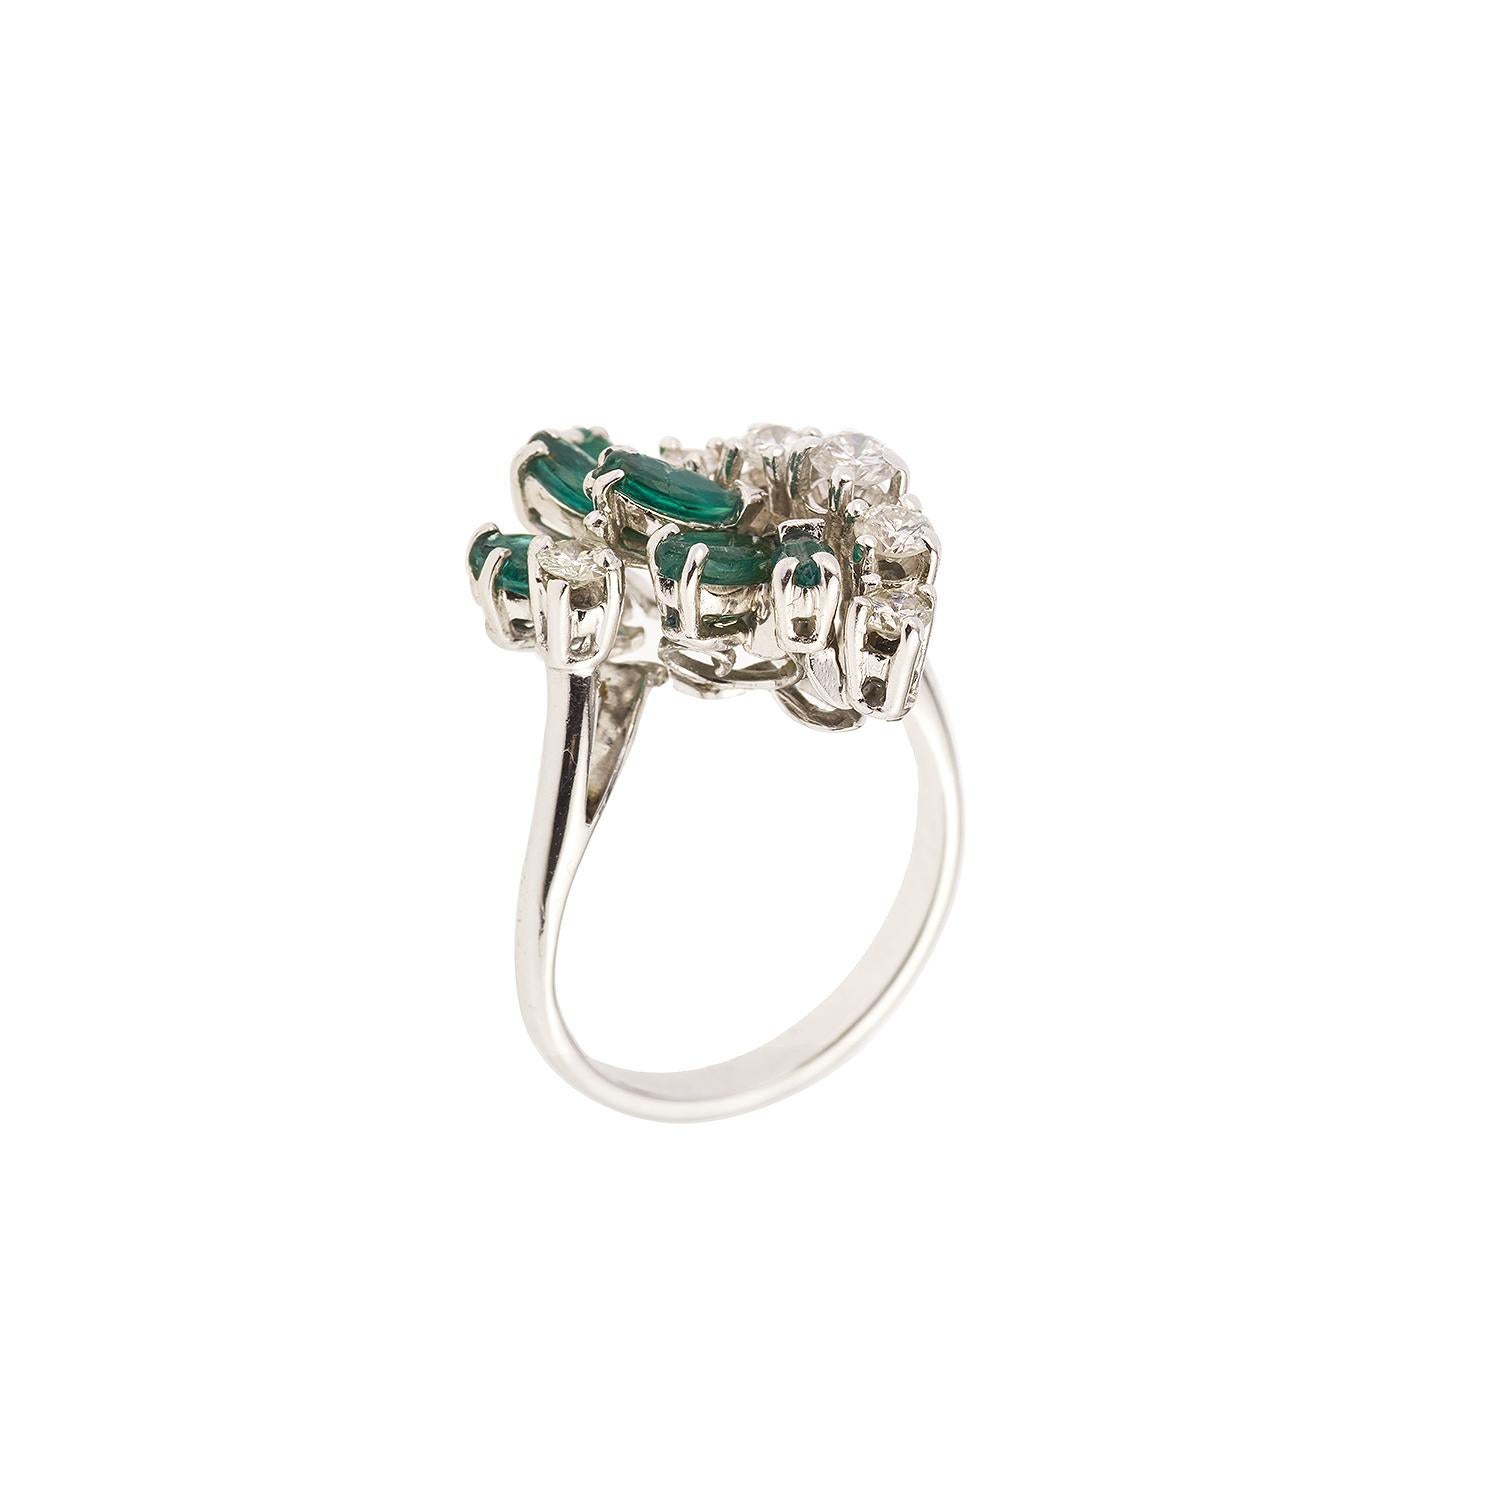 Beautiful ring set with 6 marquise cut emeralds and 6 brilliant cut diamonds.

18K white gold, 750 / 000th (eagle's head hallmark)

Diamonds weight: approx 0.40 carats

Weight of emeralds: approx 0.60 carats

Size of the ring : 51 (FR) / 5.5